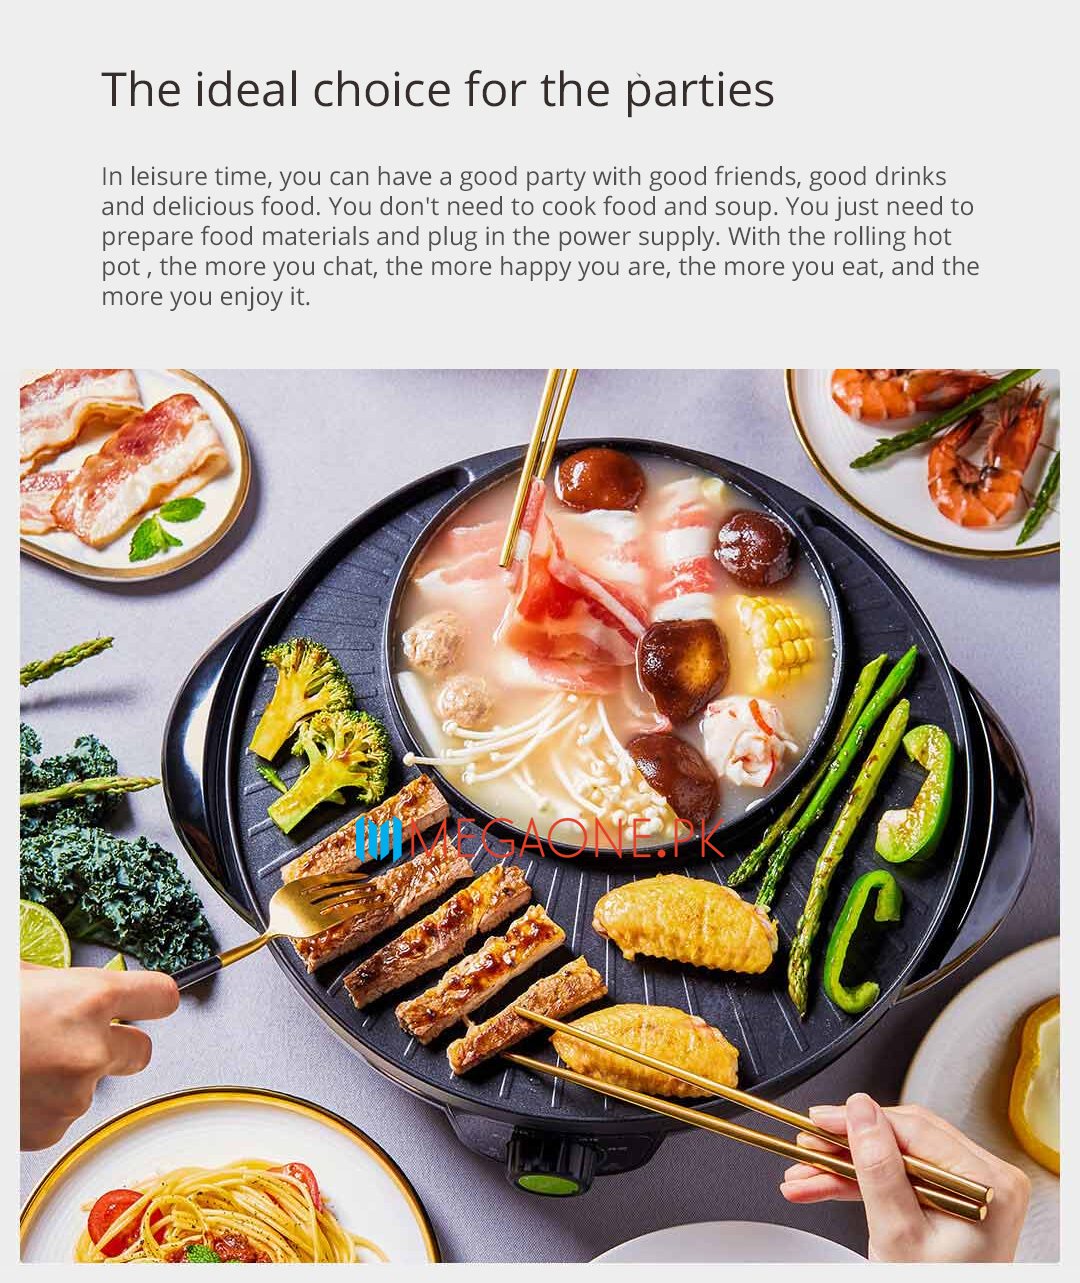 In leisure time, you can have a good party with good friends, good drinks and delicious food. You don't need to cook food and soup. You just need to prepare food materials and plug in the power supply. With the rolling hot pot , the more you chat, the more happy you are, the more you eat, and the more you enjoy it.